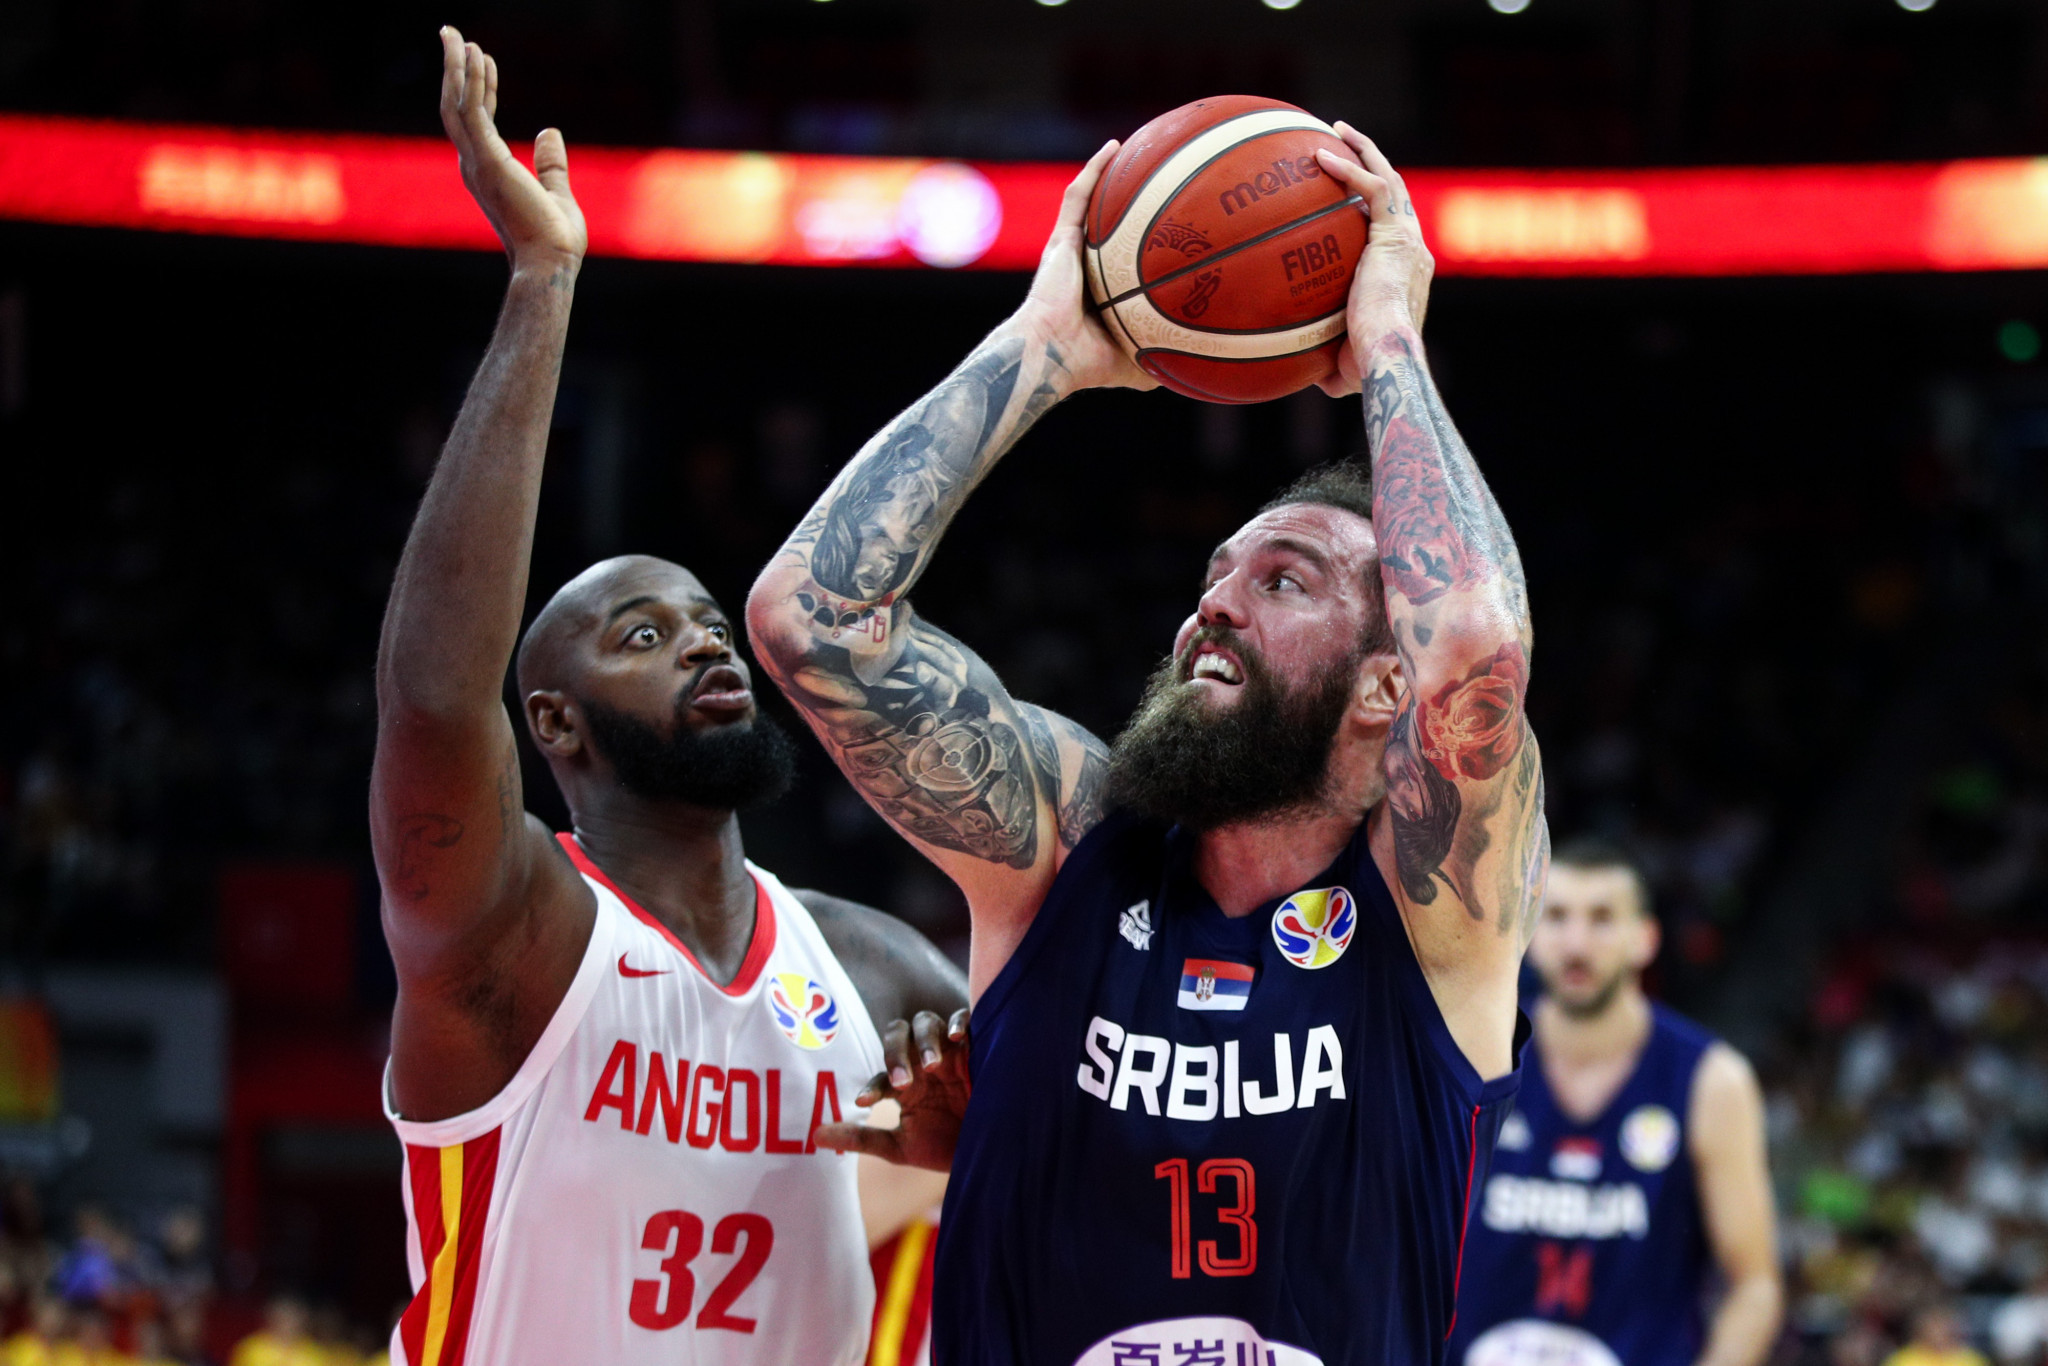 Serbia thrashed Angola in their first match of the FIBA World Cup ©Getty Images